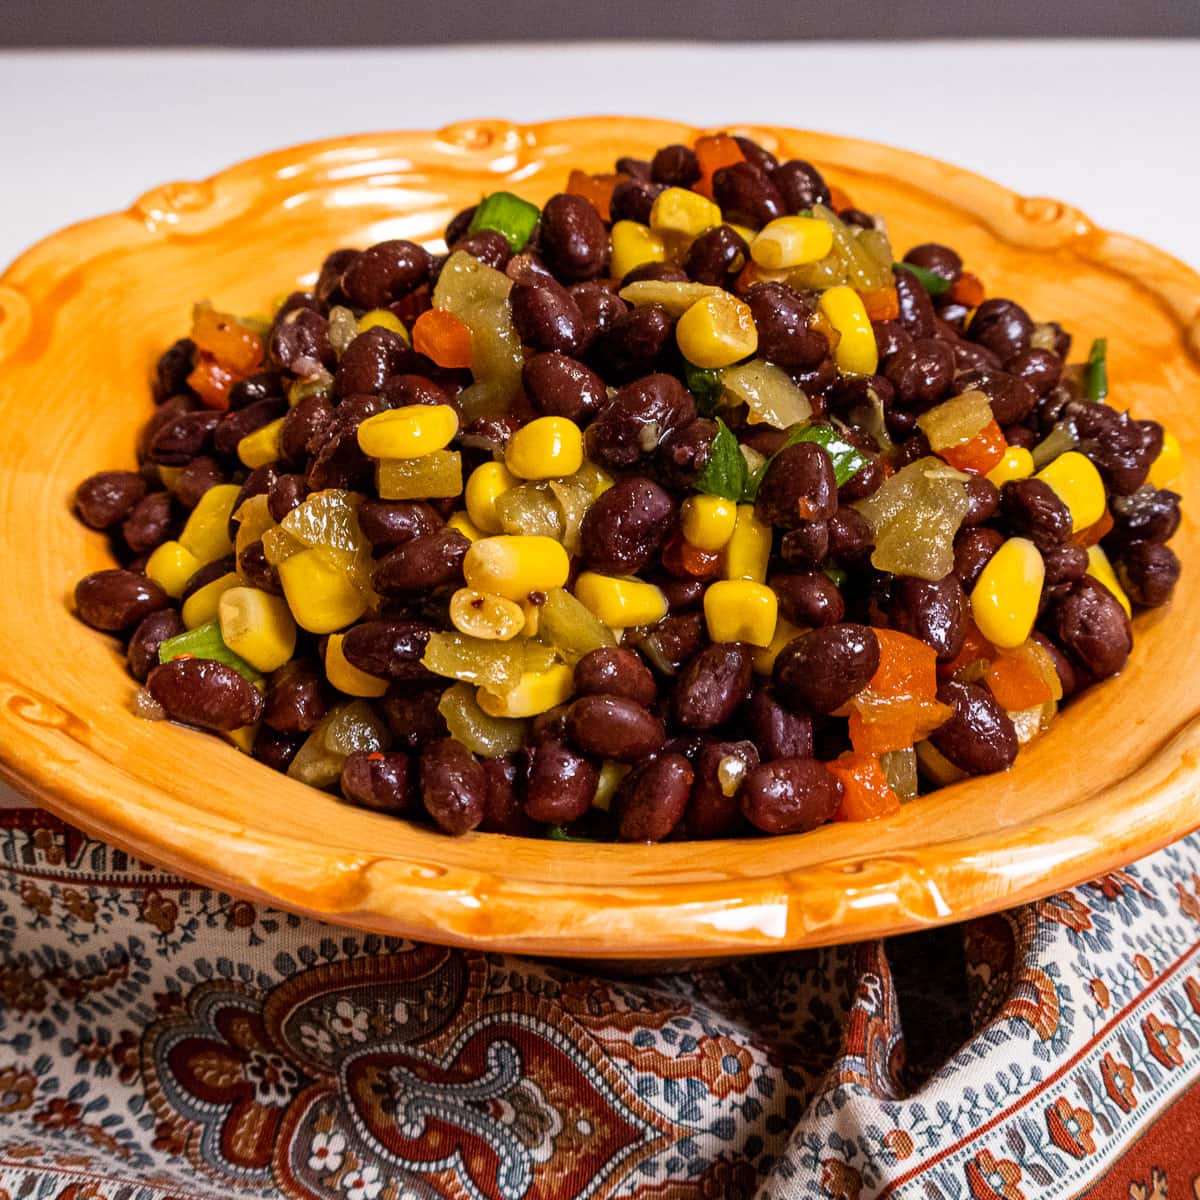 Black bean salad with black beans, corn, red peppers, green chiles in a vinagrette.